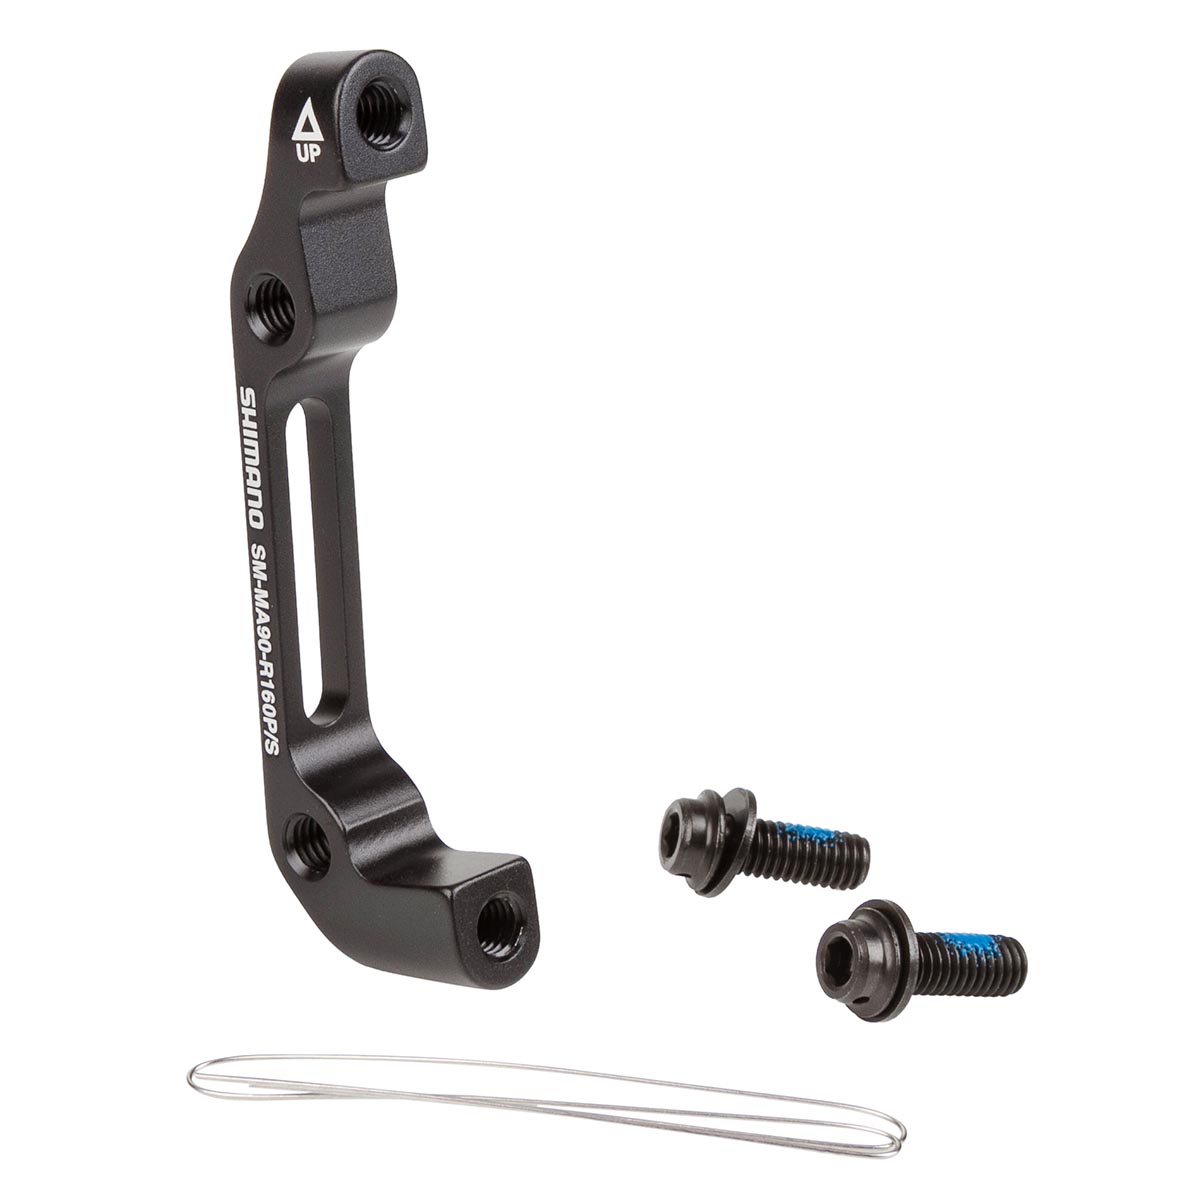 Shimano Adapter  Rear, for PM-Brake/IS-Frame, for 160 mm